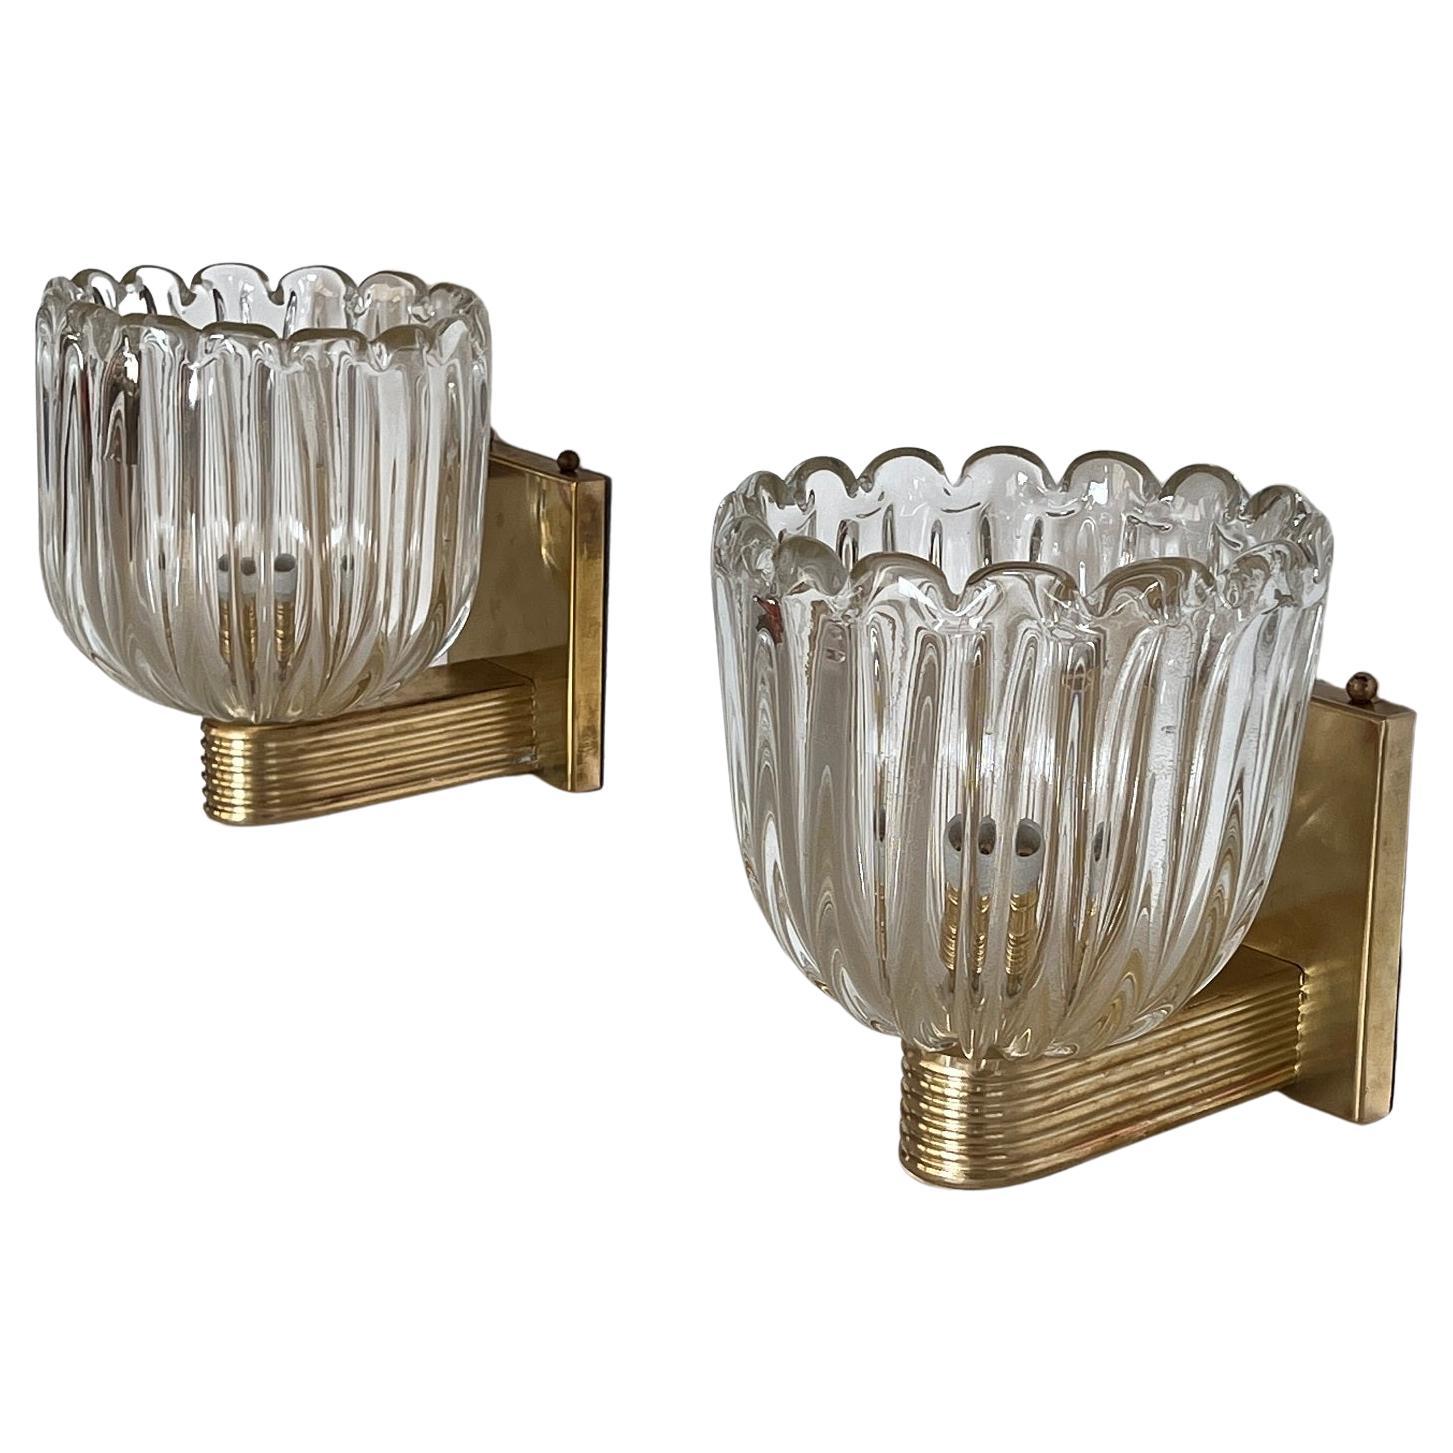 Beautiful set of two gorgeous brass wall lamps made of strong brass base and light amber-transparent Murano glasses with golden shimmer/glitter inside the glass. Art Deco style.
Made in Murano, Venice, Italy.
The brass is partially with little